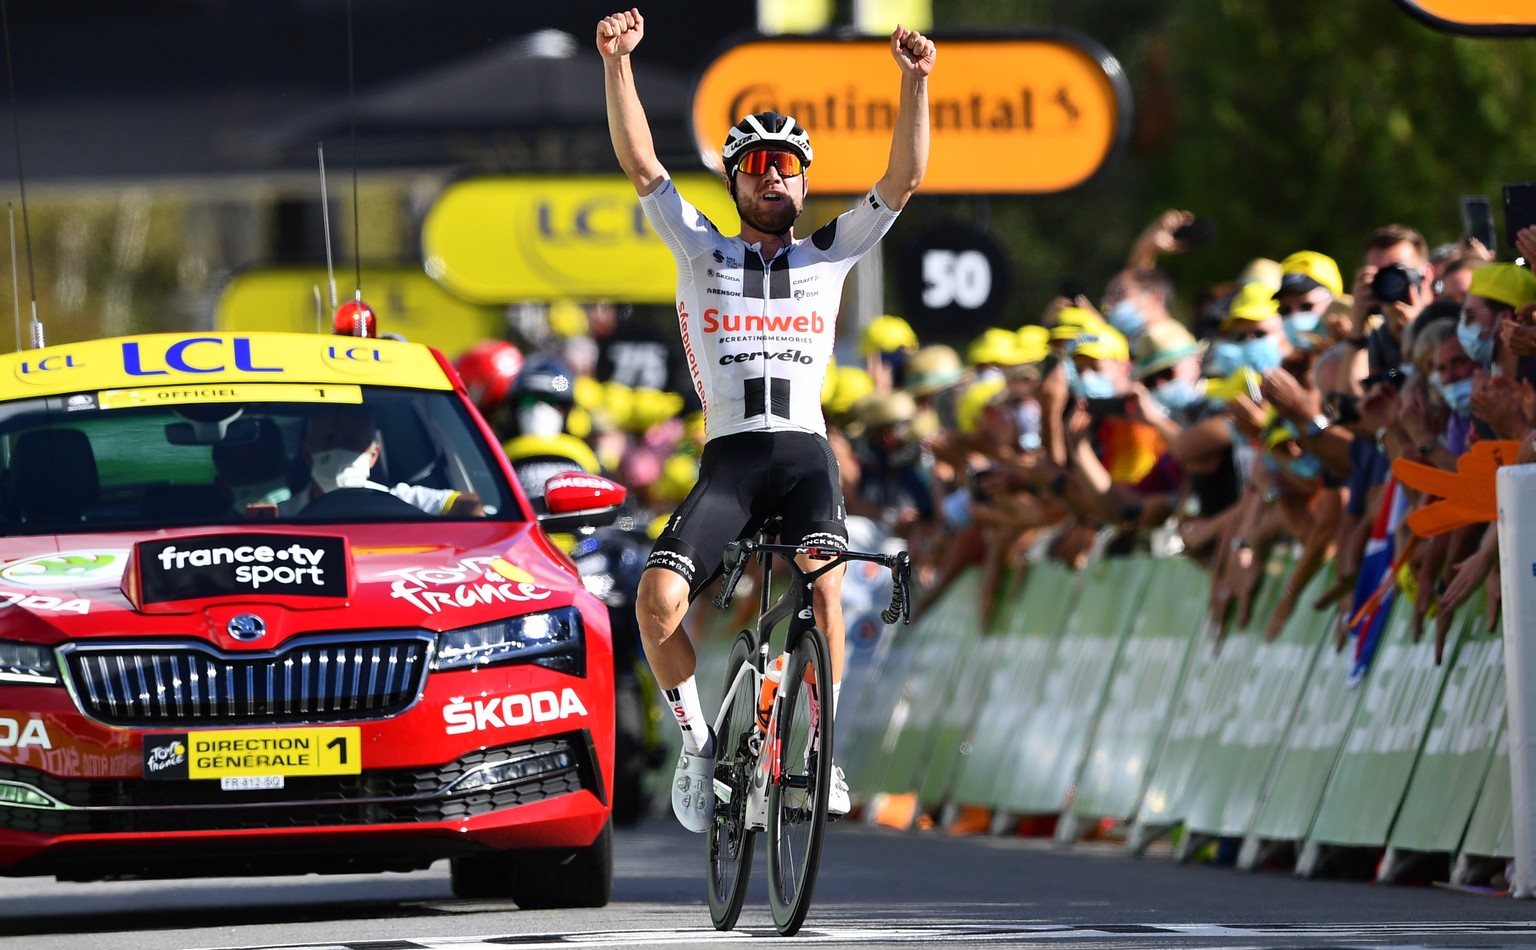 epa08659232 Swiss rider Marc Hirschi of Team Sunweb wins the 12th stage of the Tour de France cycling race over 218km from Chauvigny to Sarran, France, 10 September 2020. EPA/Stuart Franklin / Pool